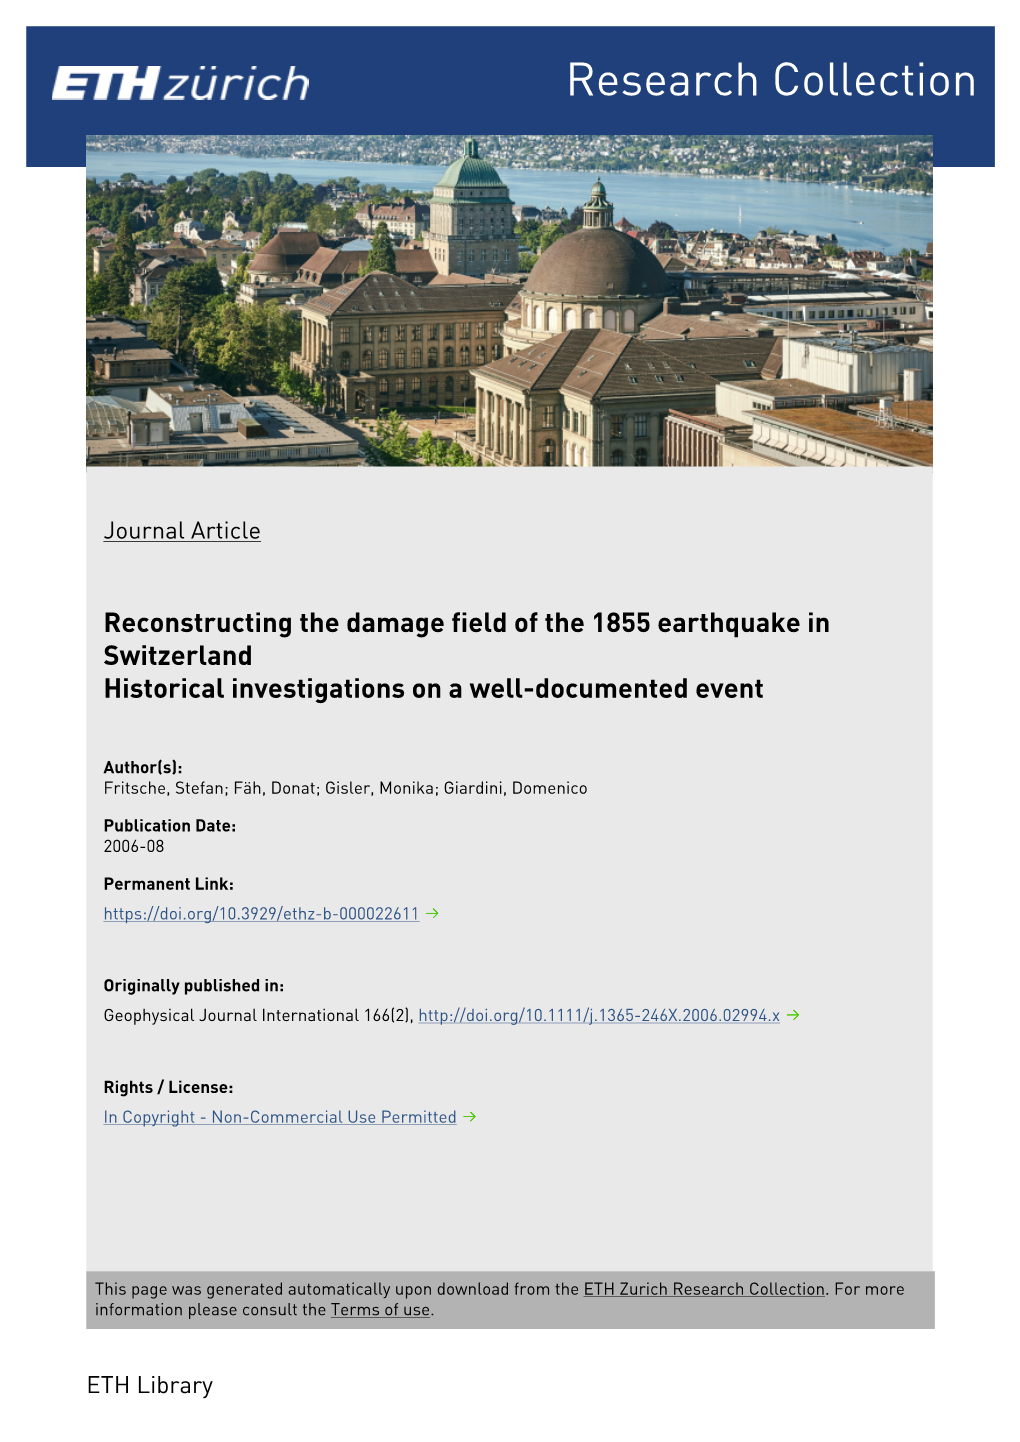 Reconstructing the Damage Field of the 1855 Earthquake in Switzerland Historical Investigations on a Well-Documented Event